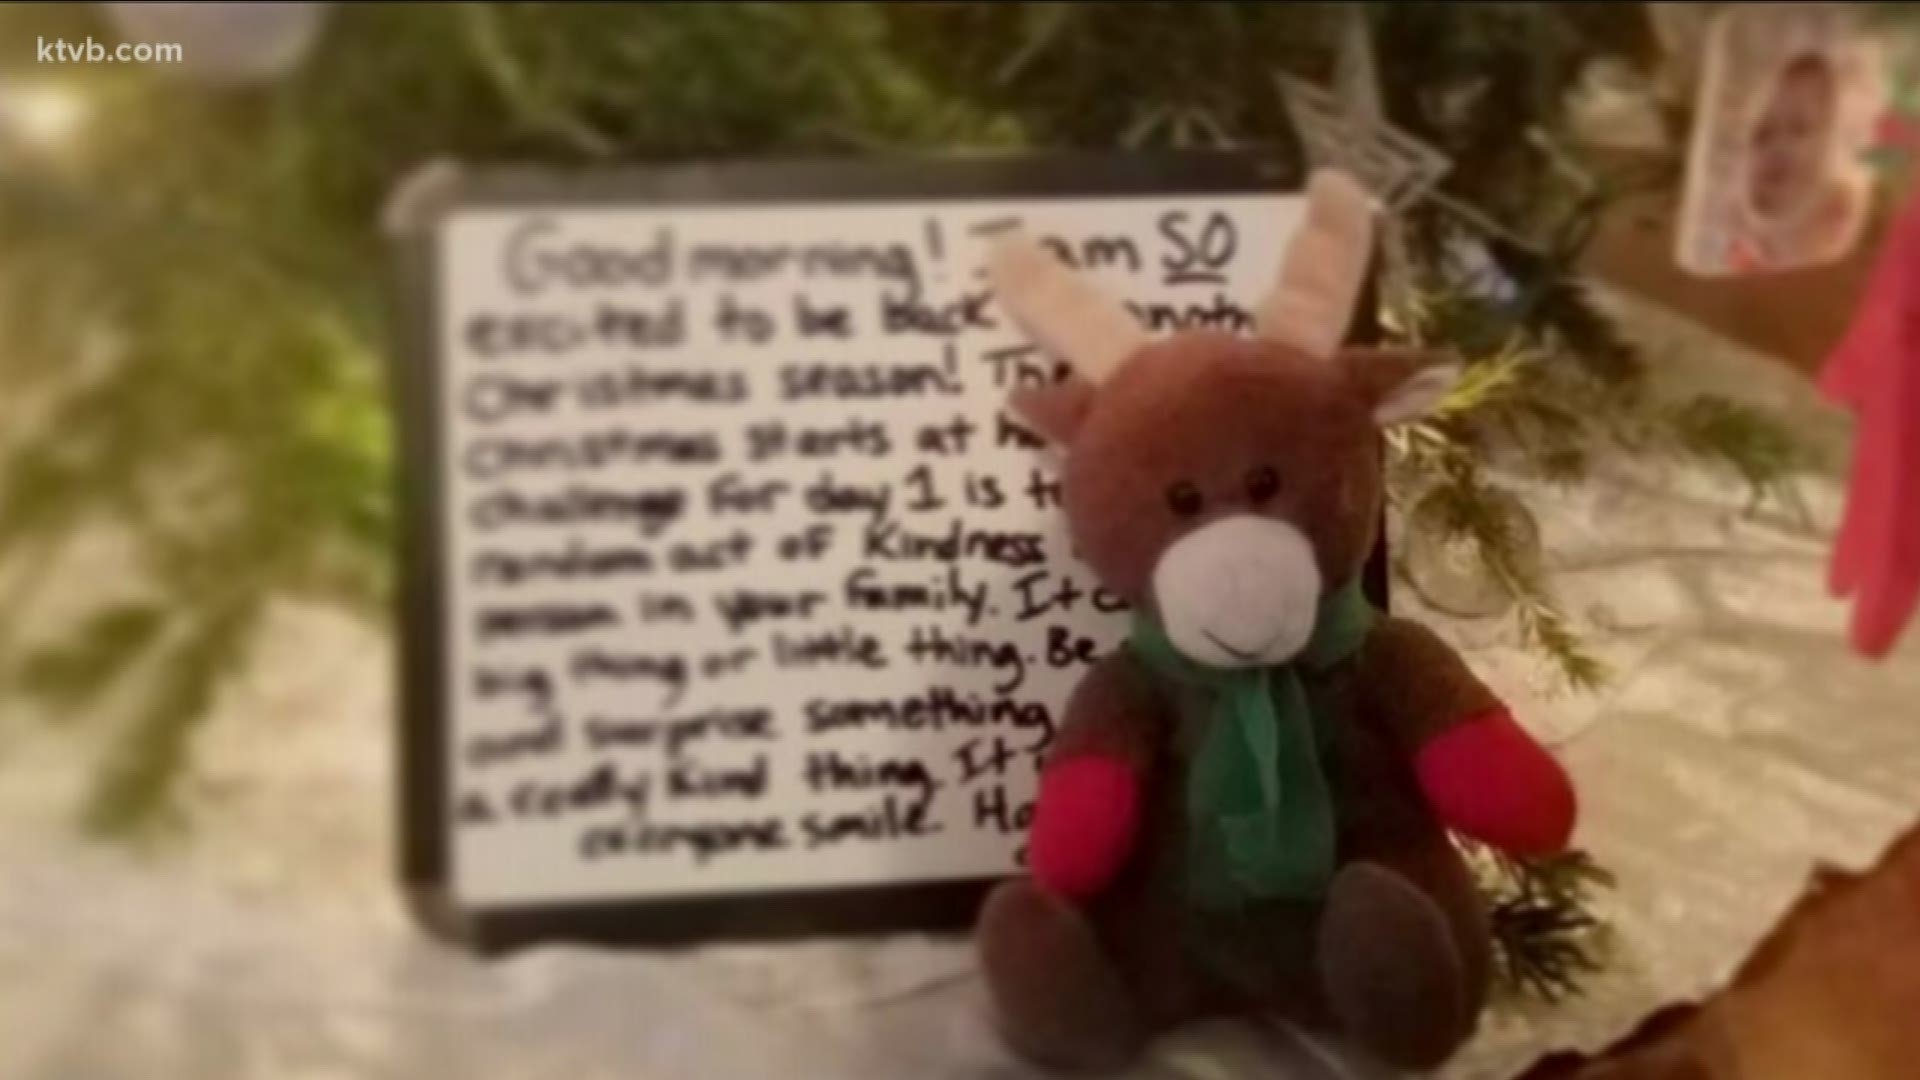 Each day leading up to Christmas, kids will find Randy the Reindeer holding a new card in his arms, an act of kindness challenge for the day.